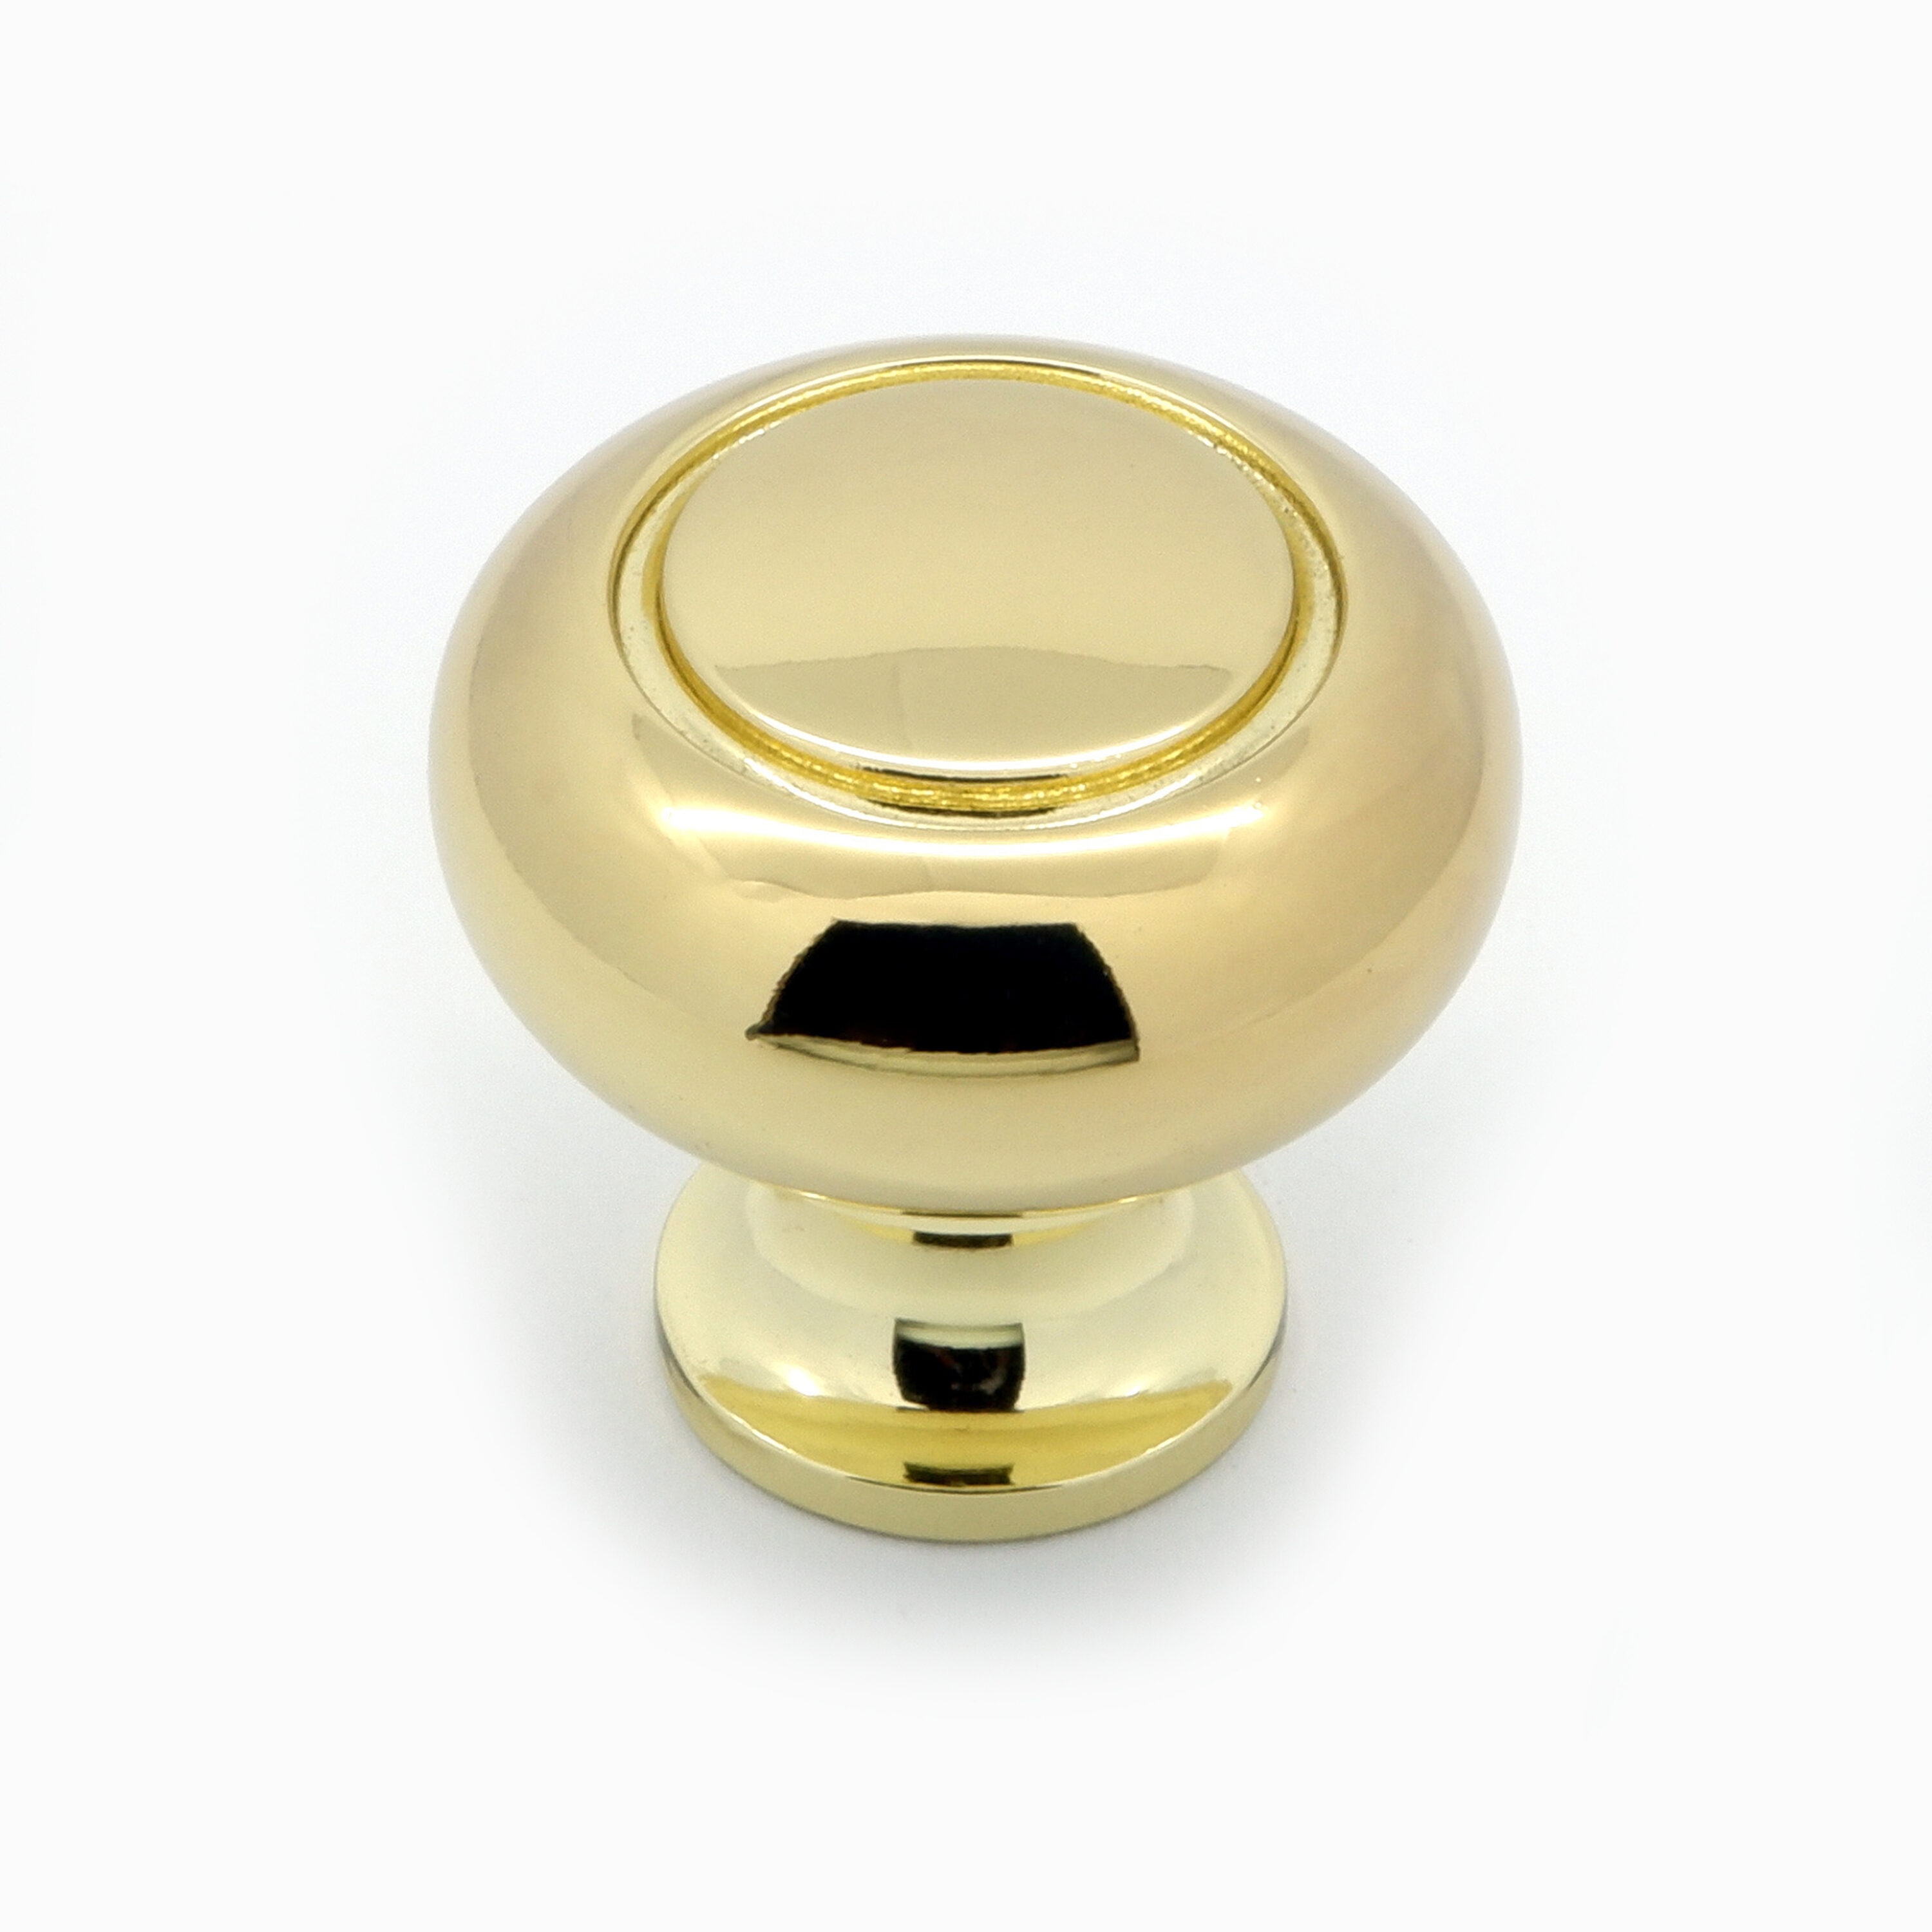 allen + roth Hadley 1-1/4-in Brushed Gold Round Transitional Cabinet Knob